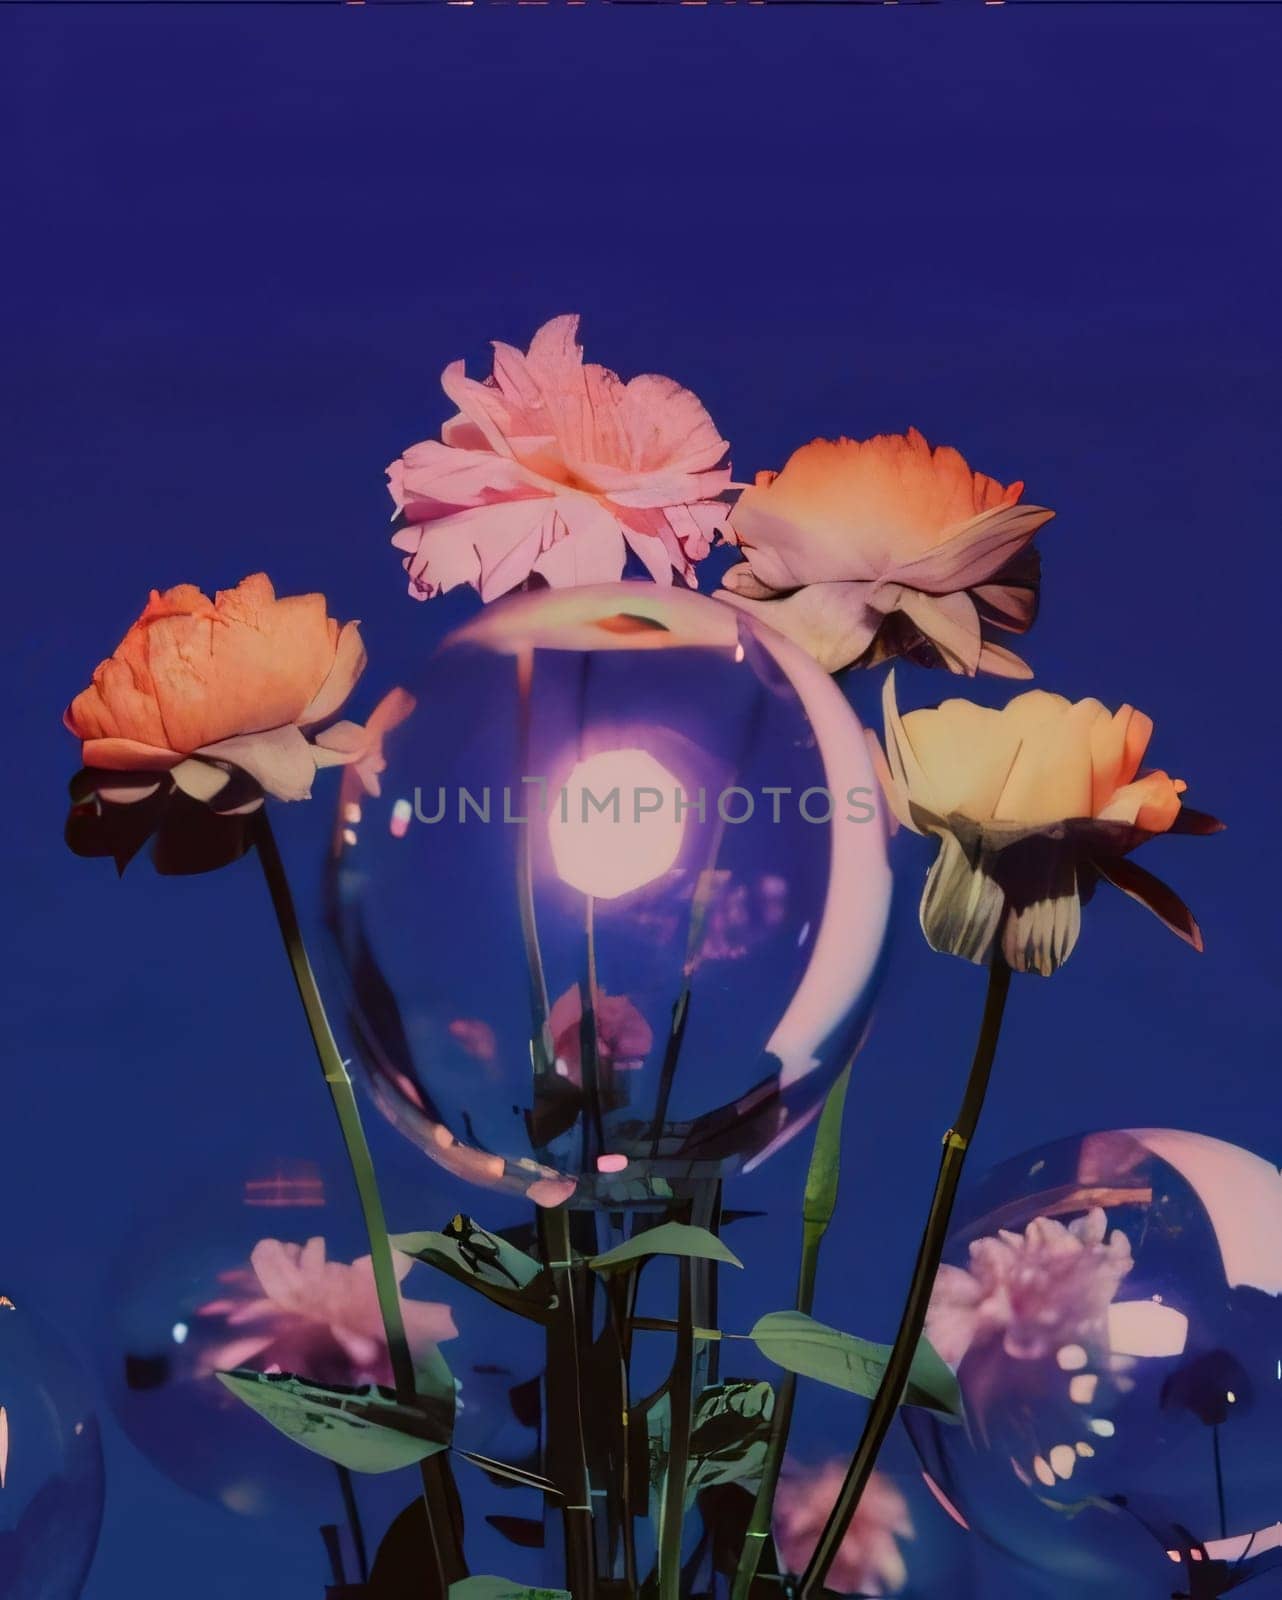 Pink flowers on navy blue background, abstract concept. Flowering flowers, a symbol of spring, new life. A joyful time of nature waking up to life.